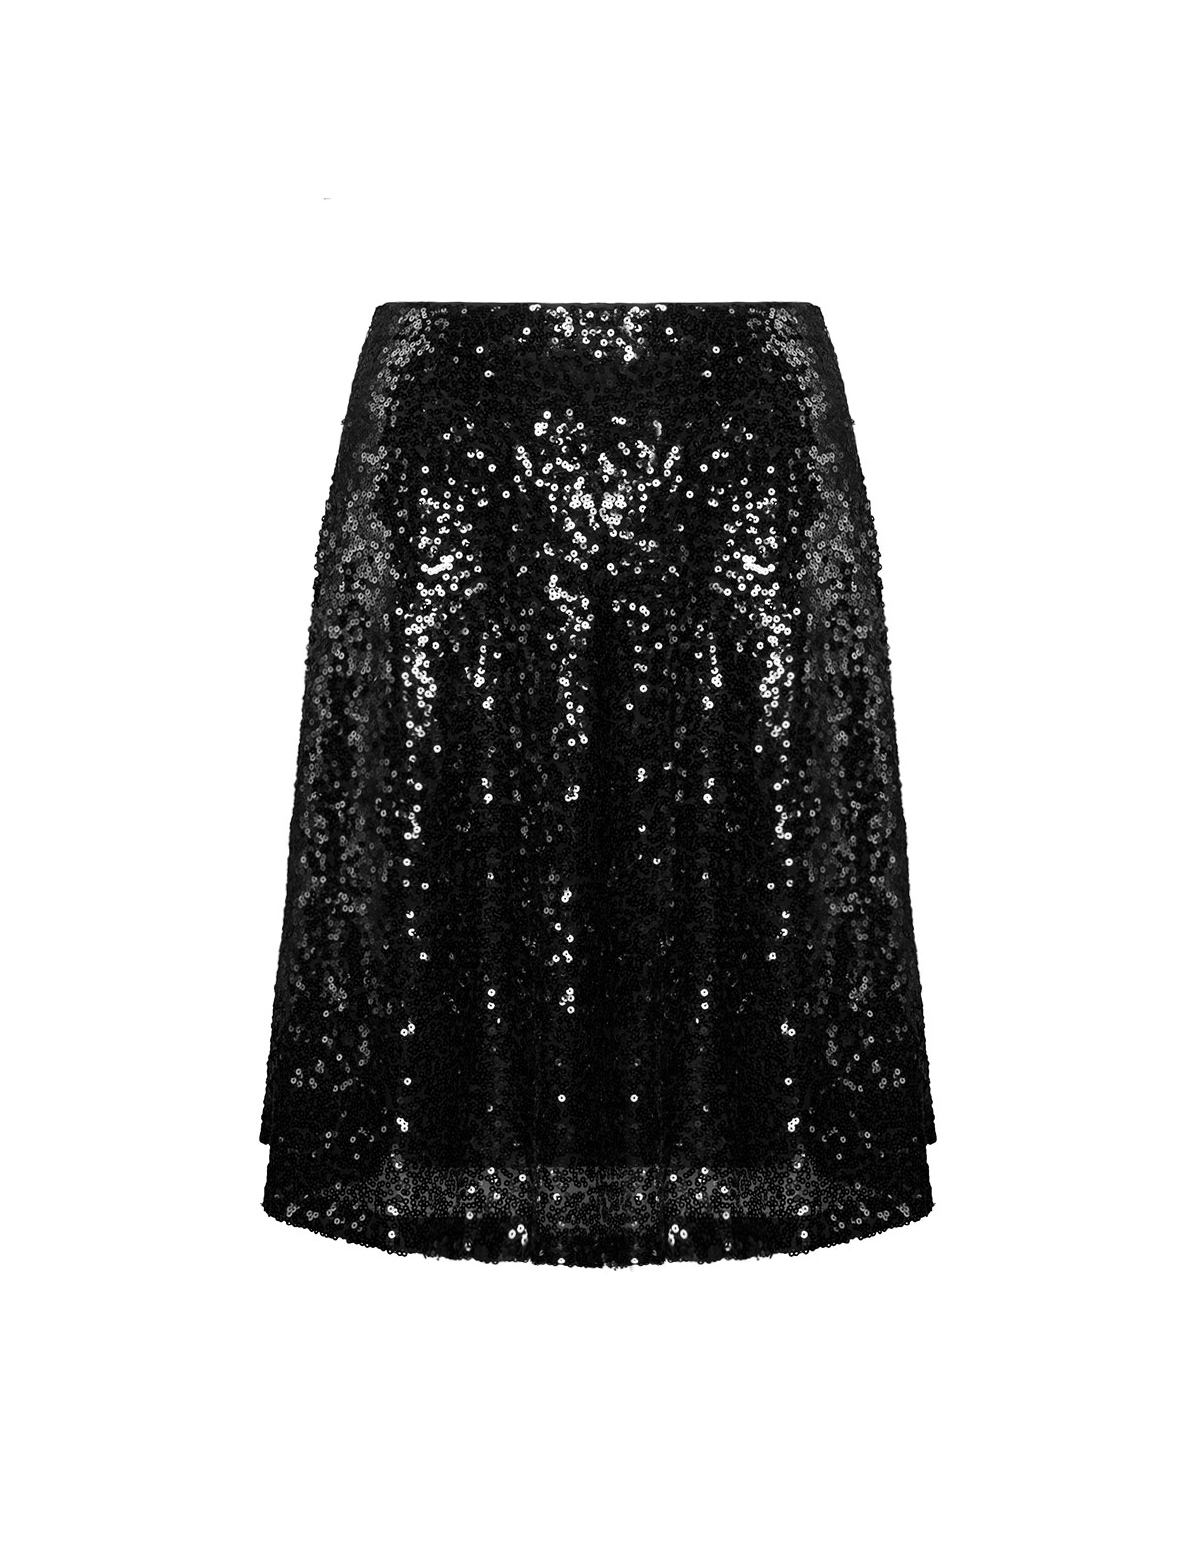 Sequin flared skirt by
navabi